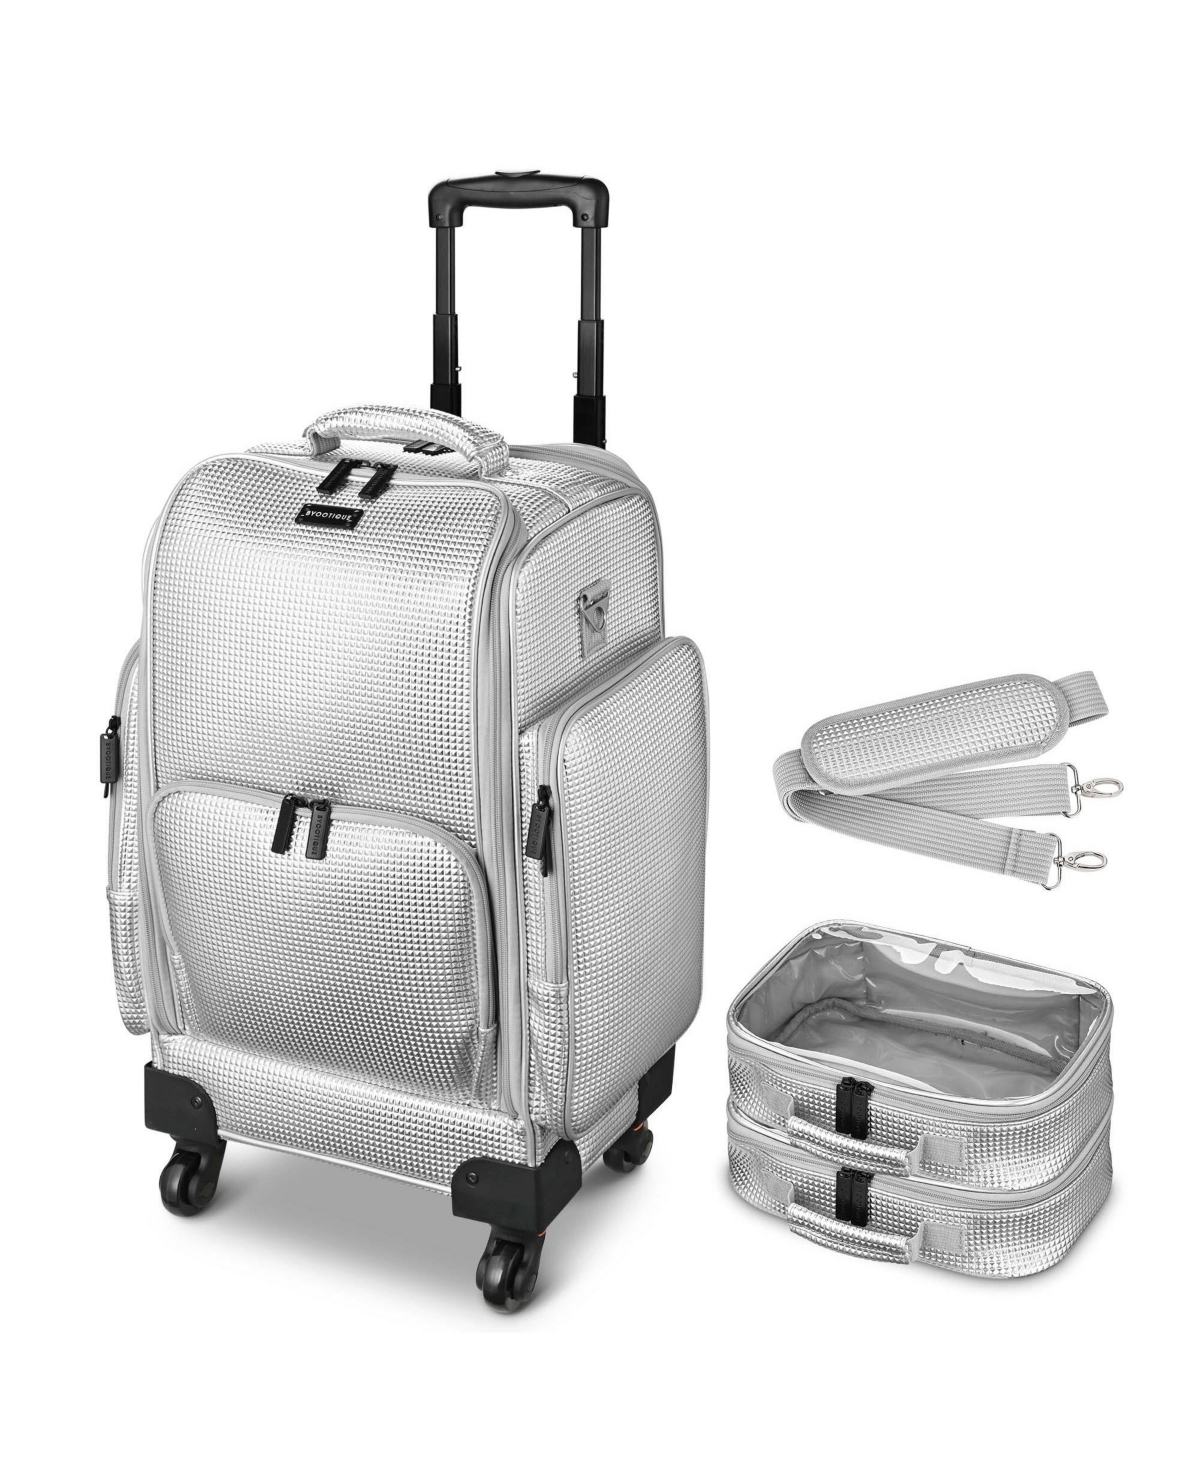 Soft Sided Rolling Makeup Train Case Cosmetic Organizer Travel Trolley - White